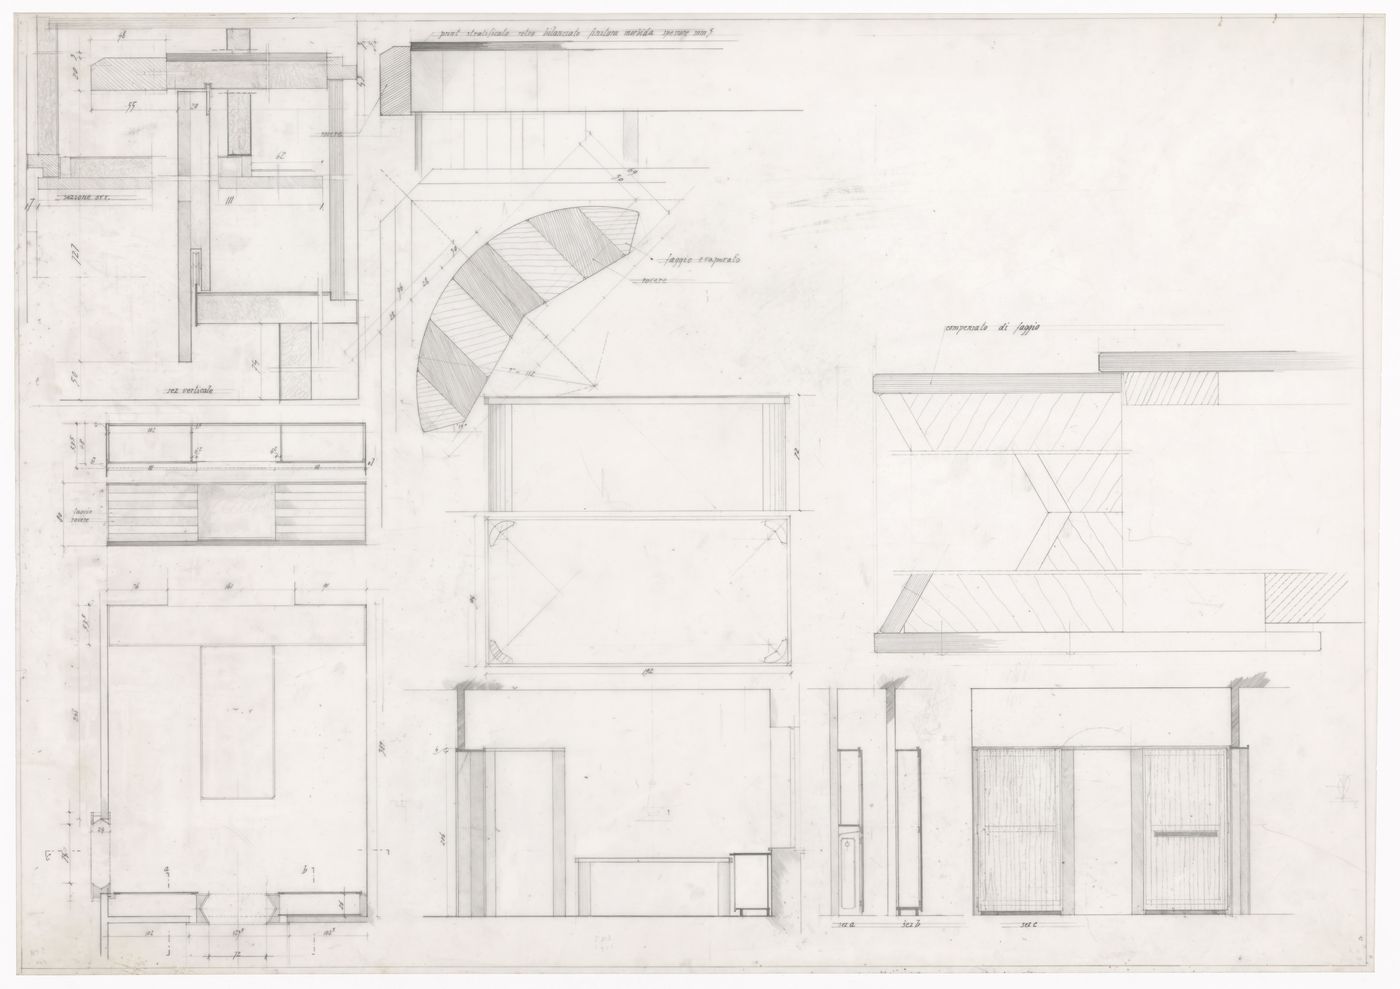 Sections and furnishings details for Casa Longhini, Milan, Italy